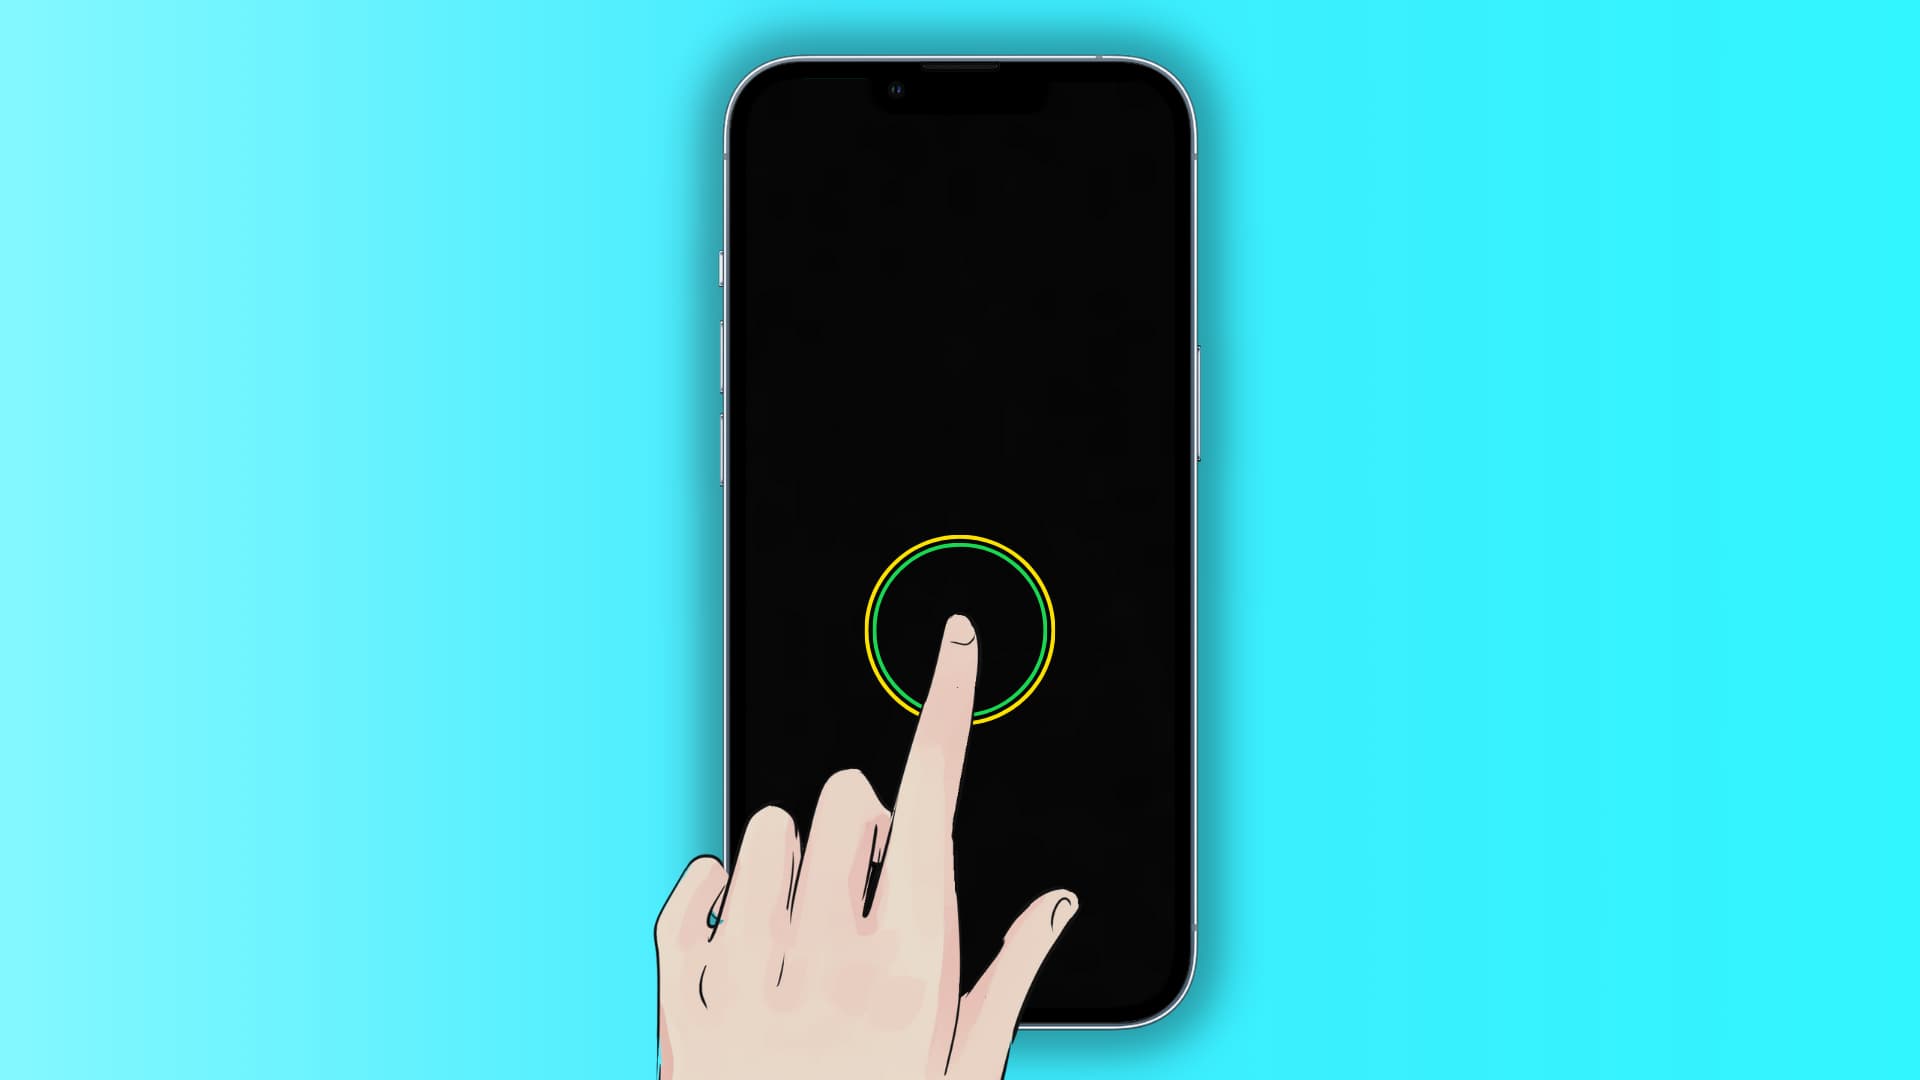 Illustration of a locked iPhone showing the black Lock Screen and a finger tapping the screen to wake it